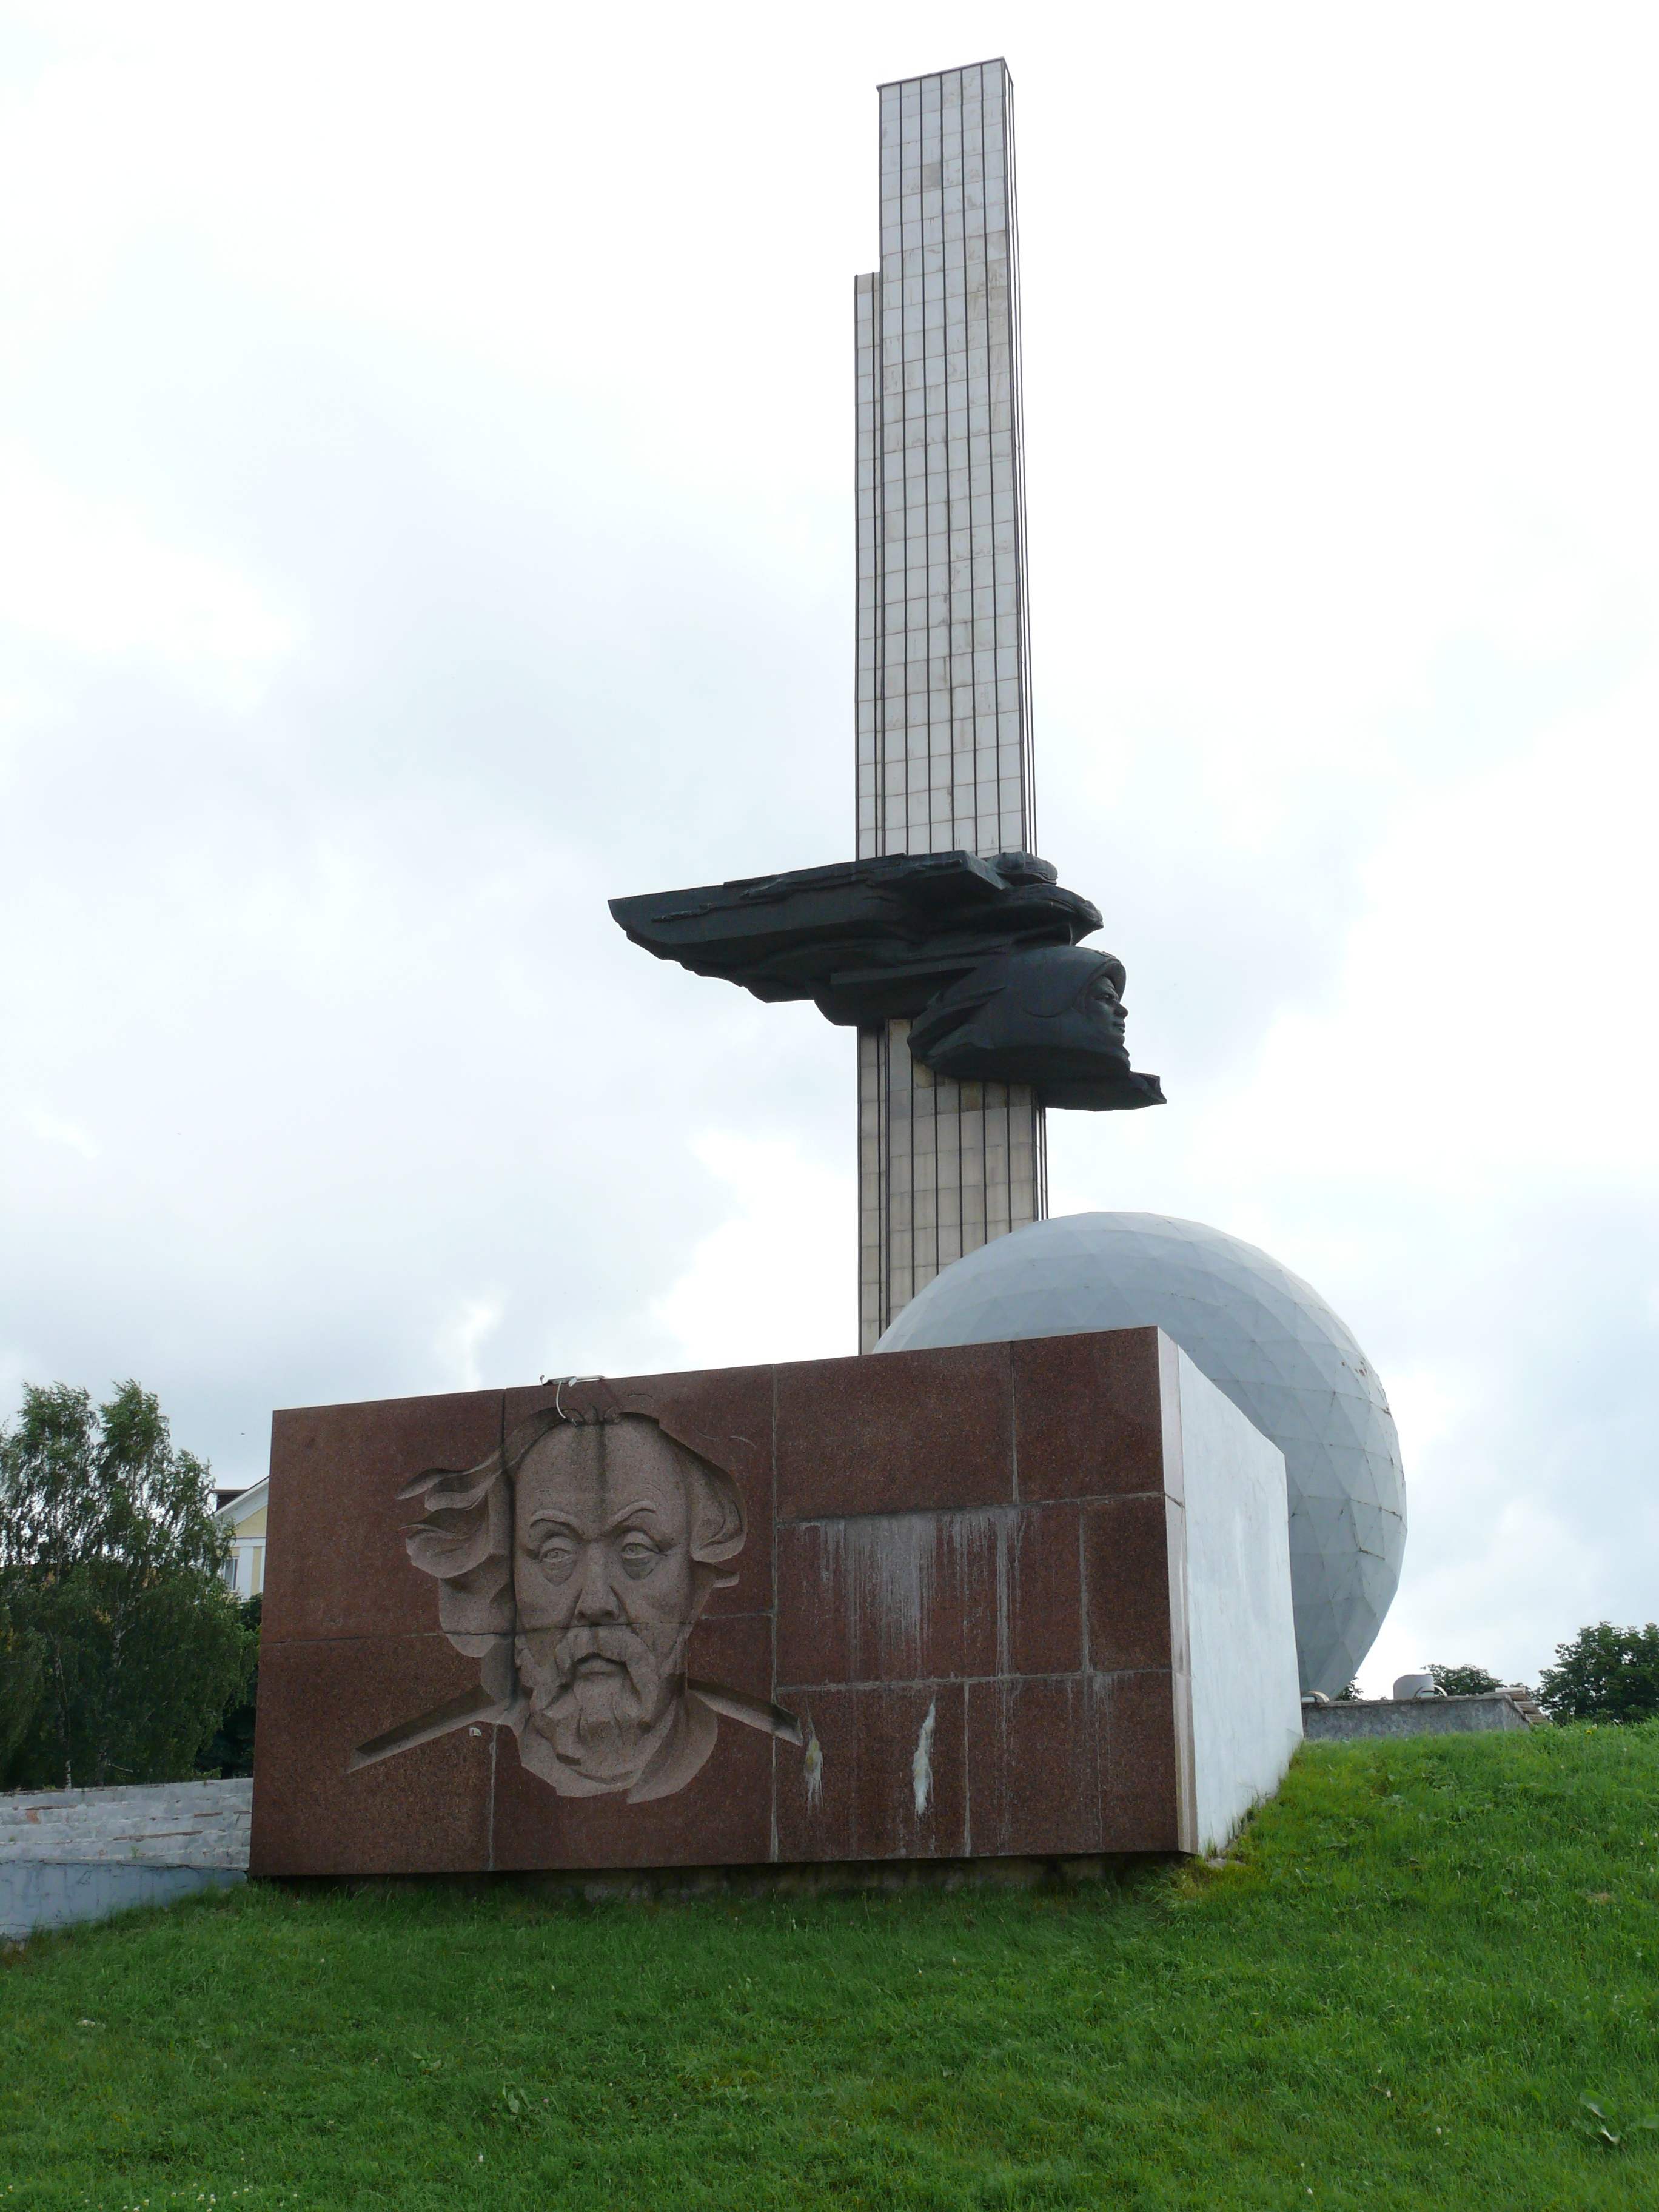 Monument to Konstantin E. Tsiolkovsky and Yuri Gagarin located in the city of Kaluga, Russia